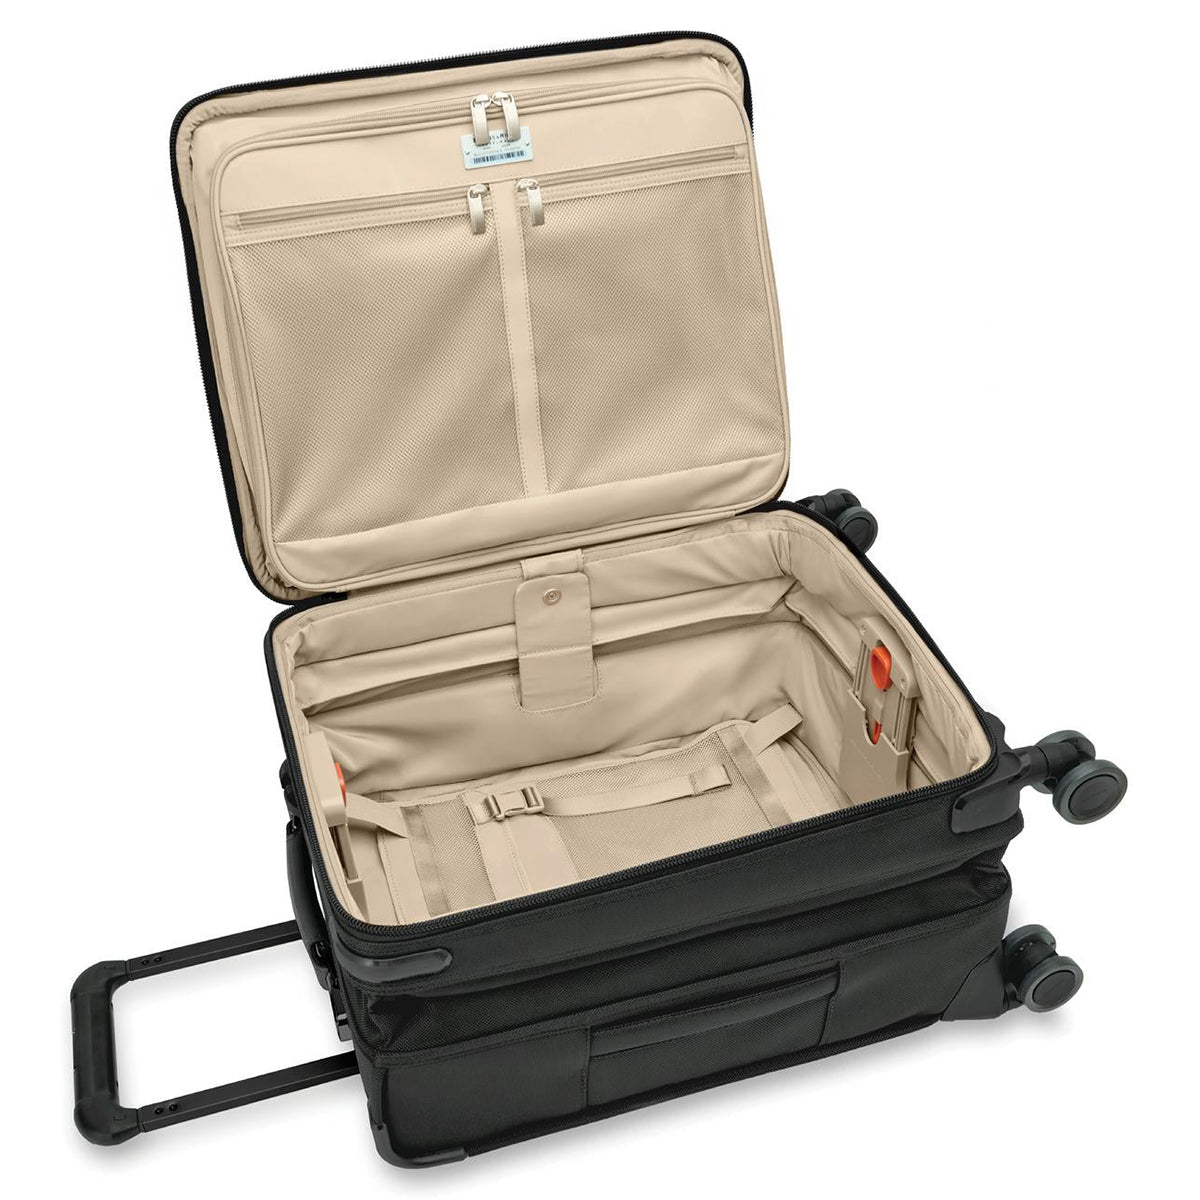 Briggs & Riley Baseline Global Carry-On Expandable Spinner